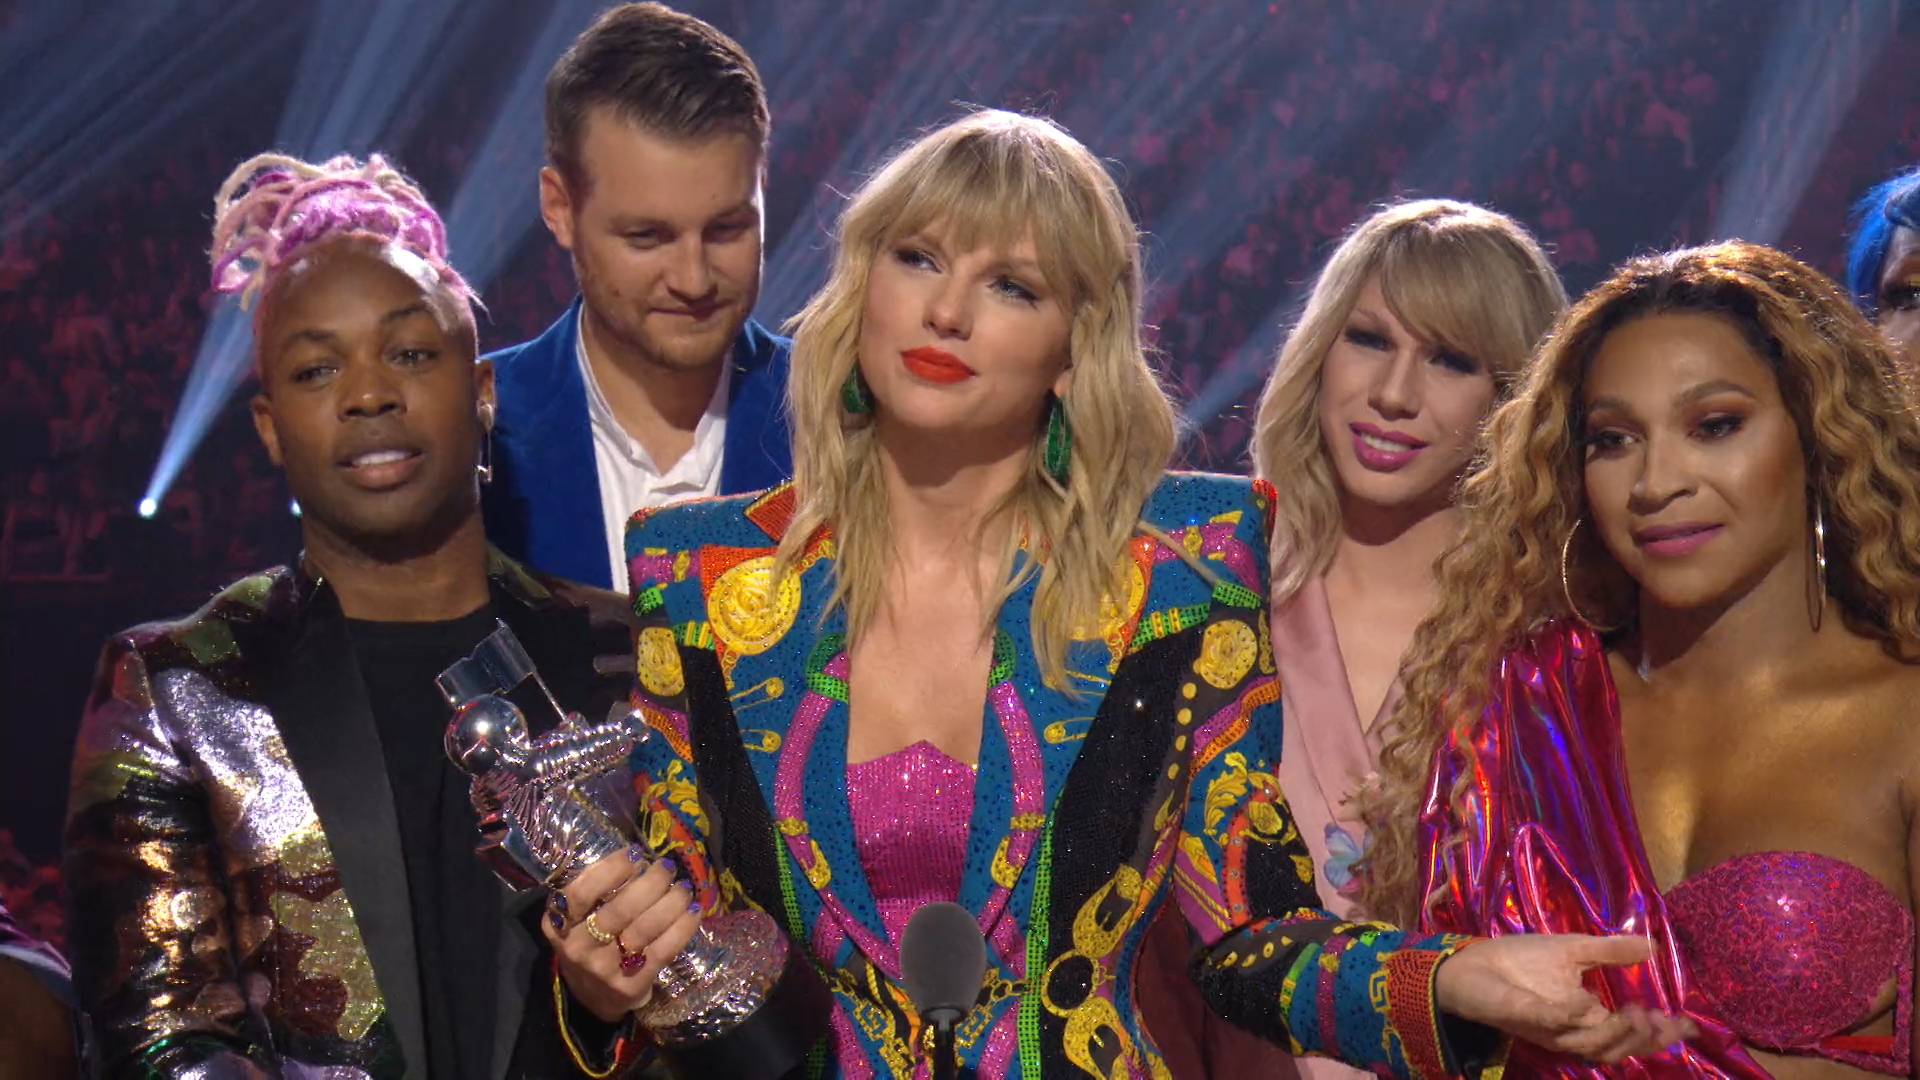 Taylor Swift Wins Video of the Year at the 2019 VMAs.